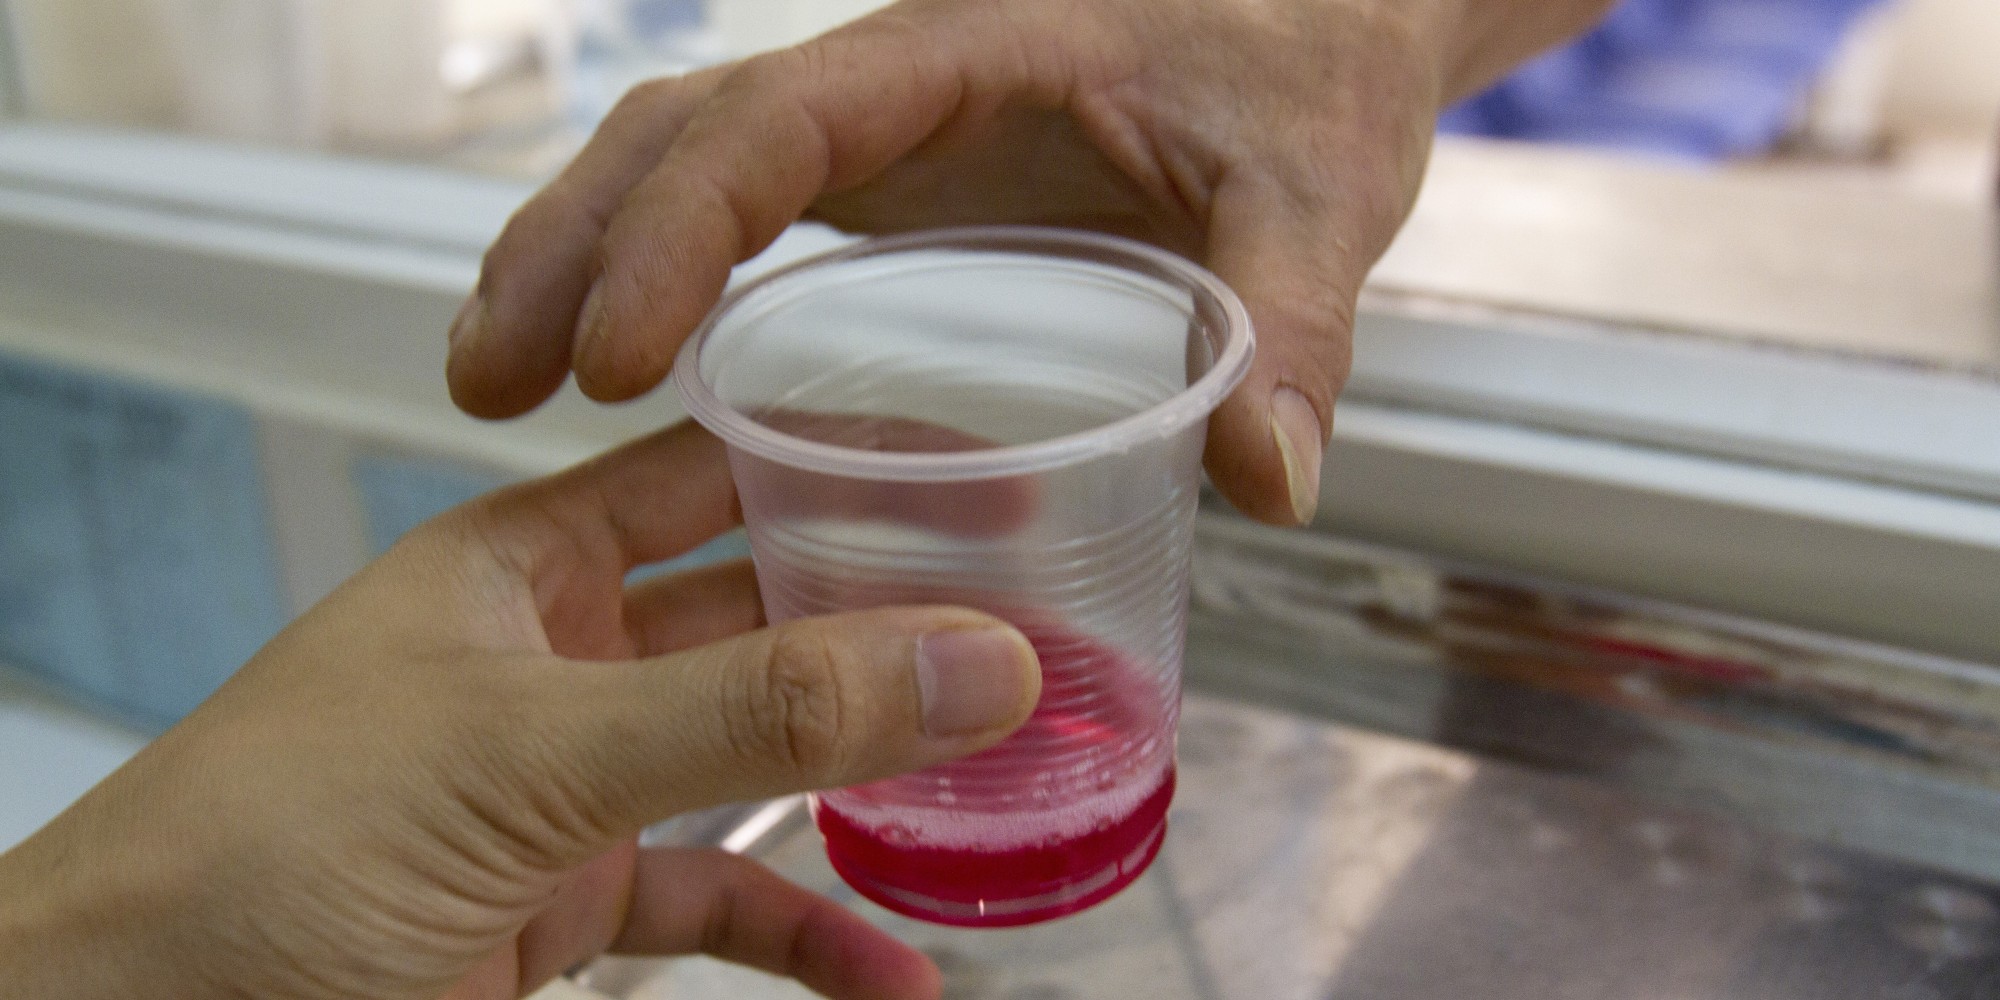 SFU study finds methadone treatment helps reduce crime rates by third